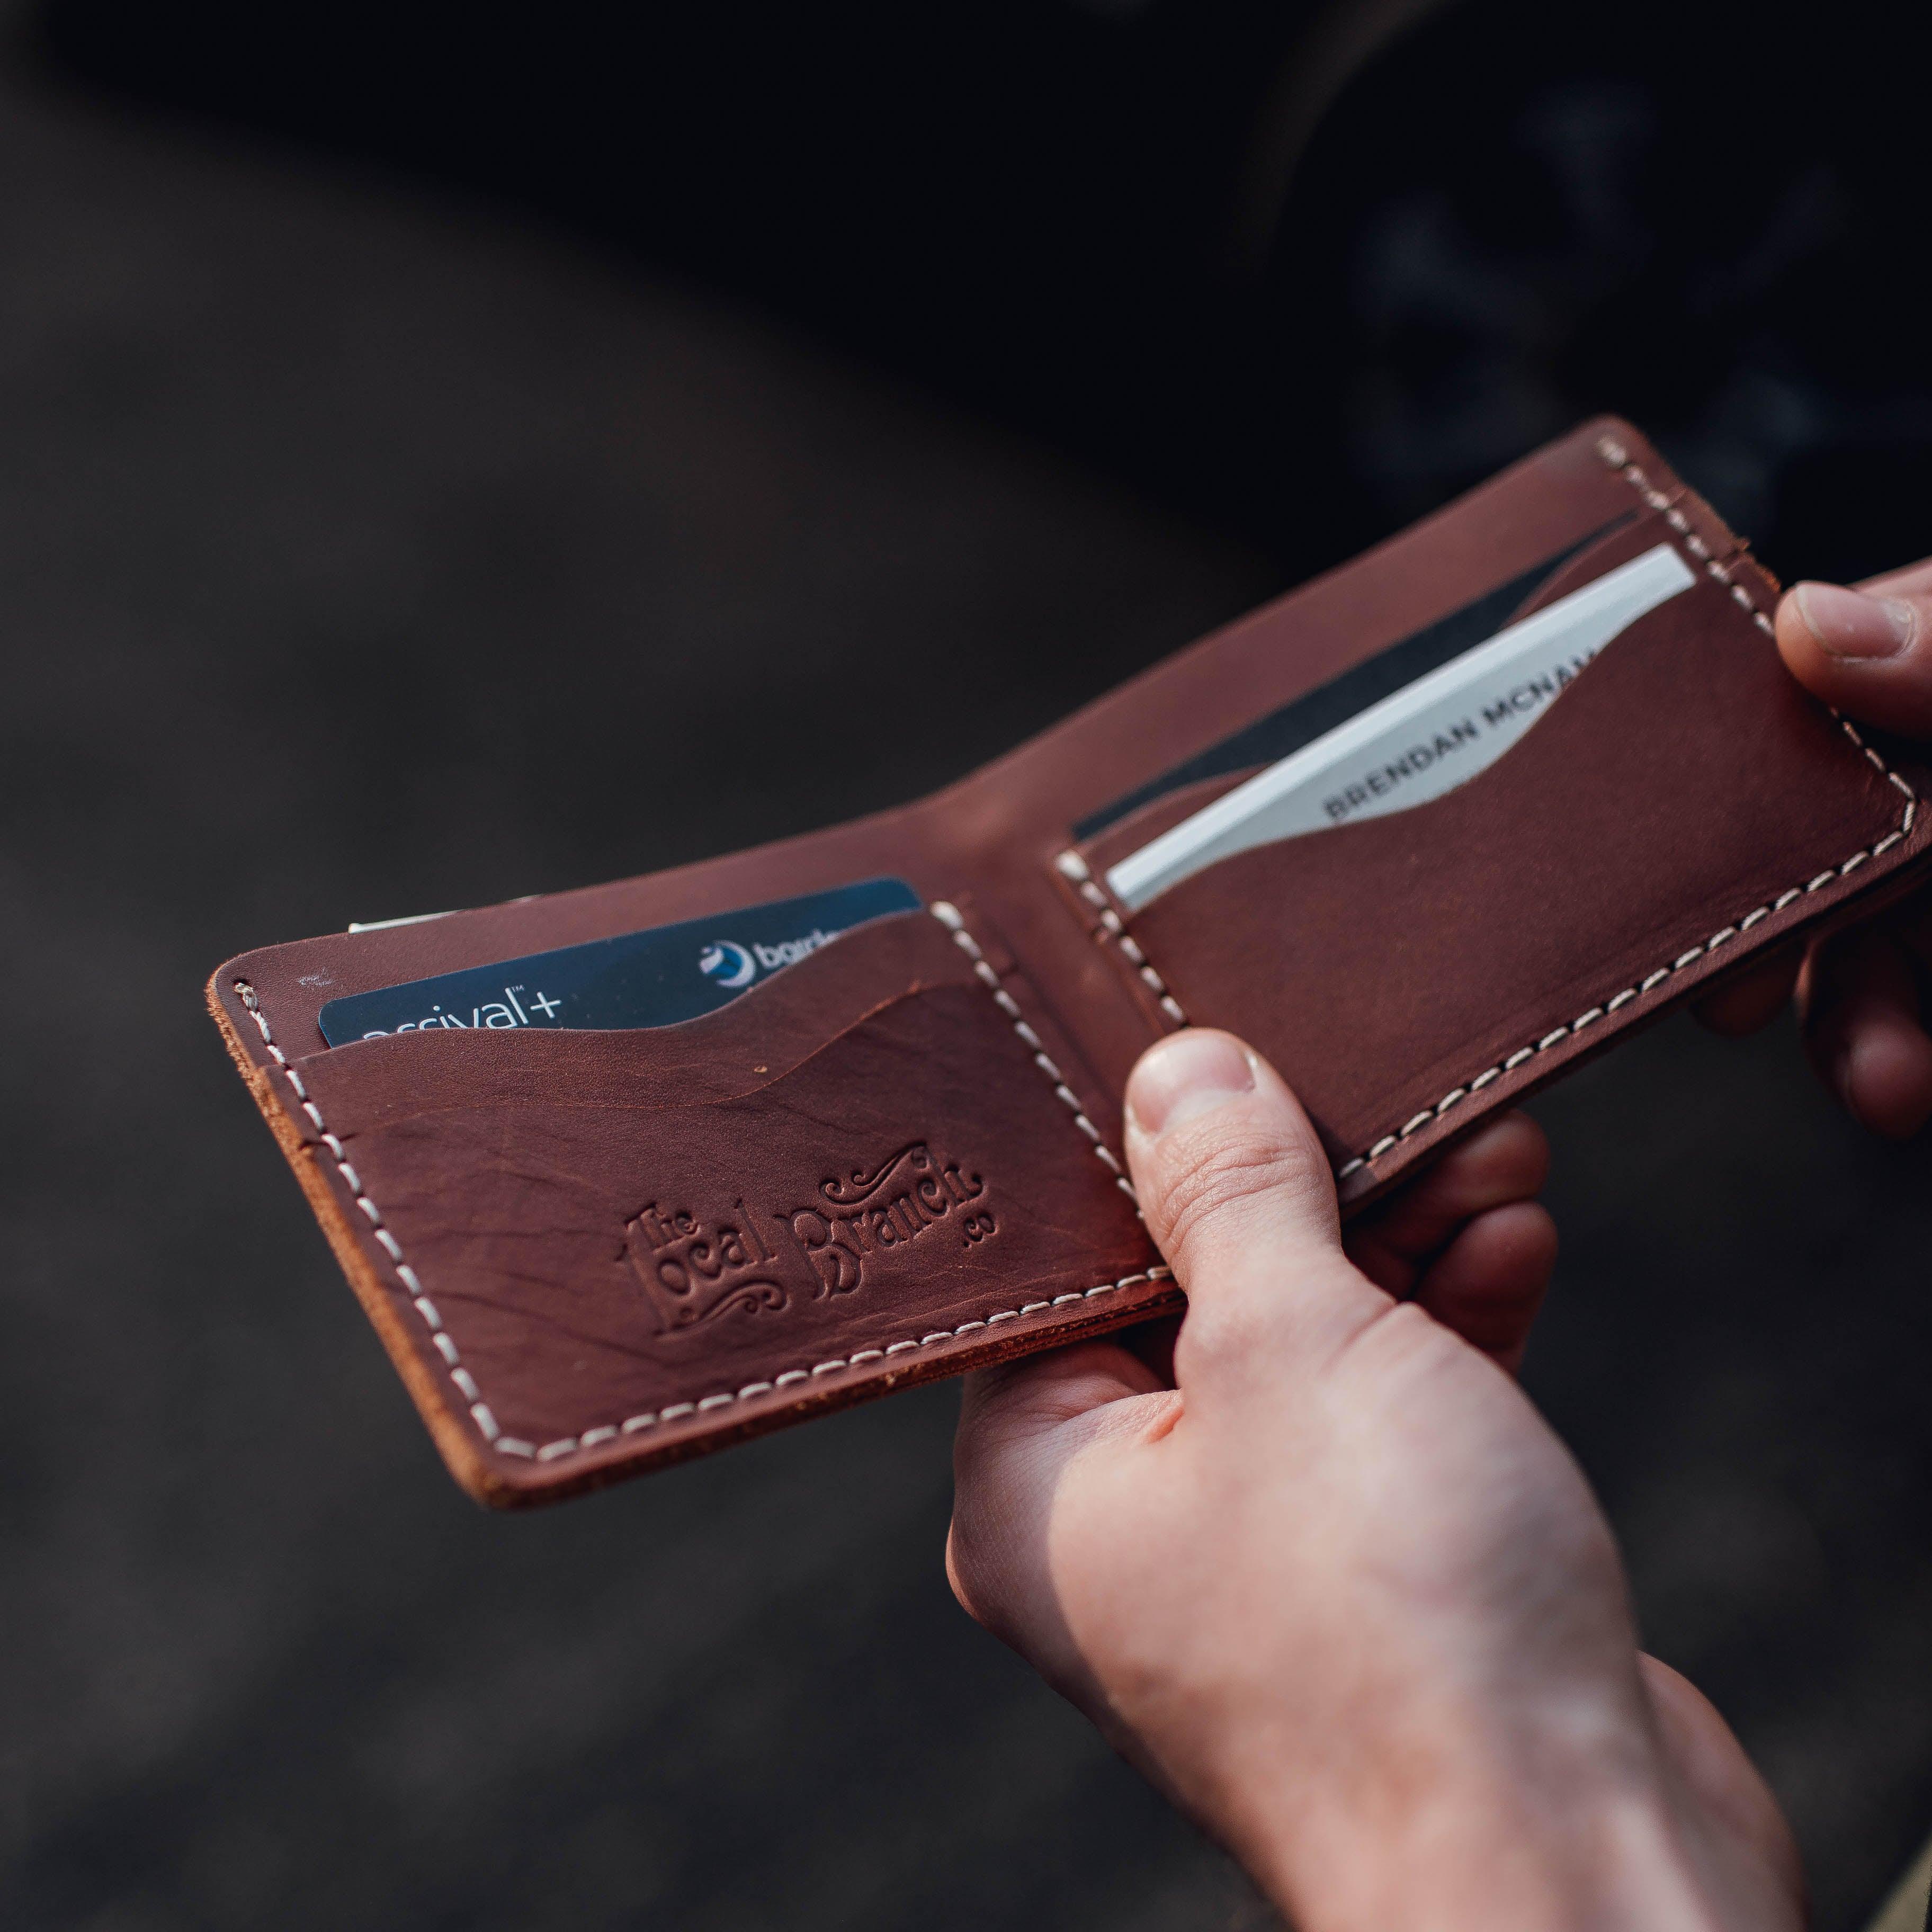 Handcrafted Leather Bifold Wallet